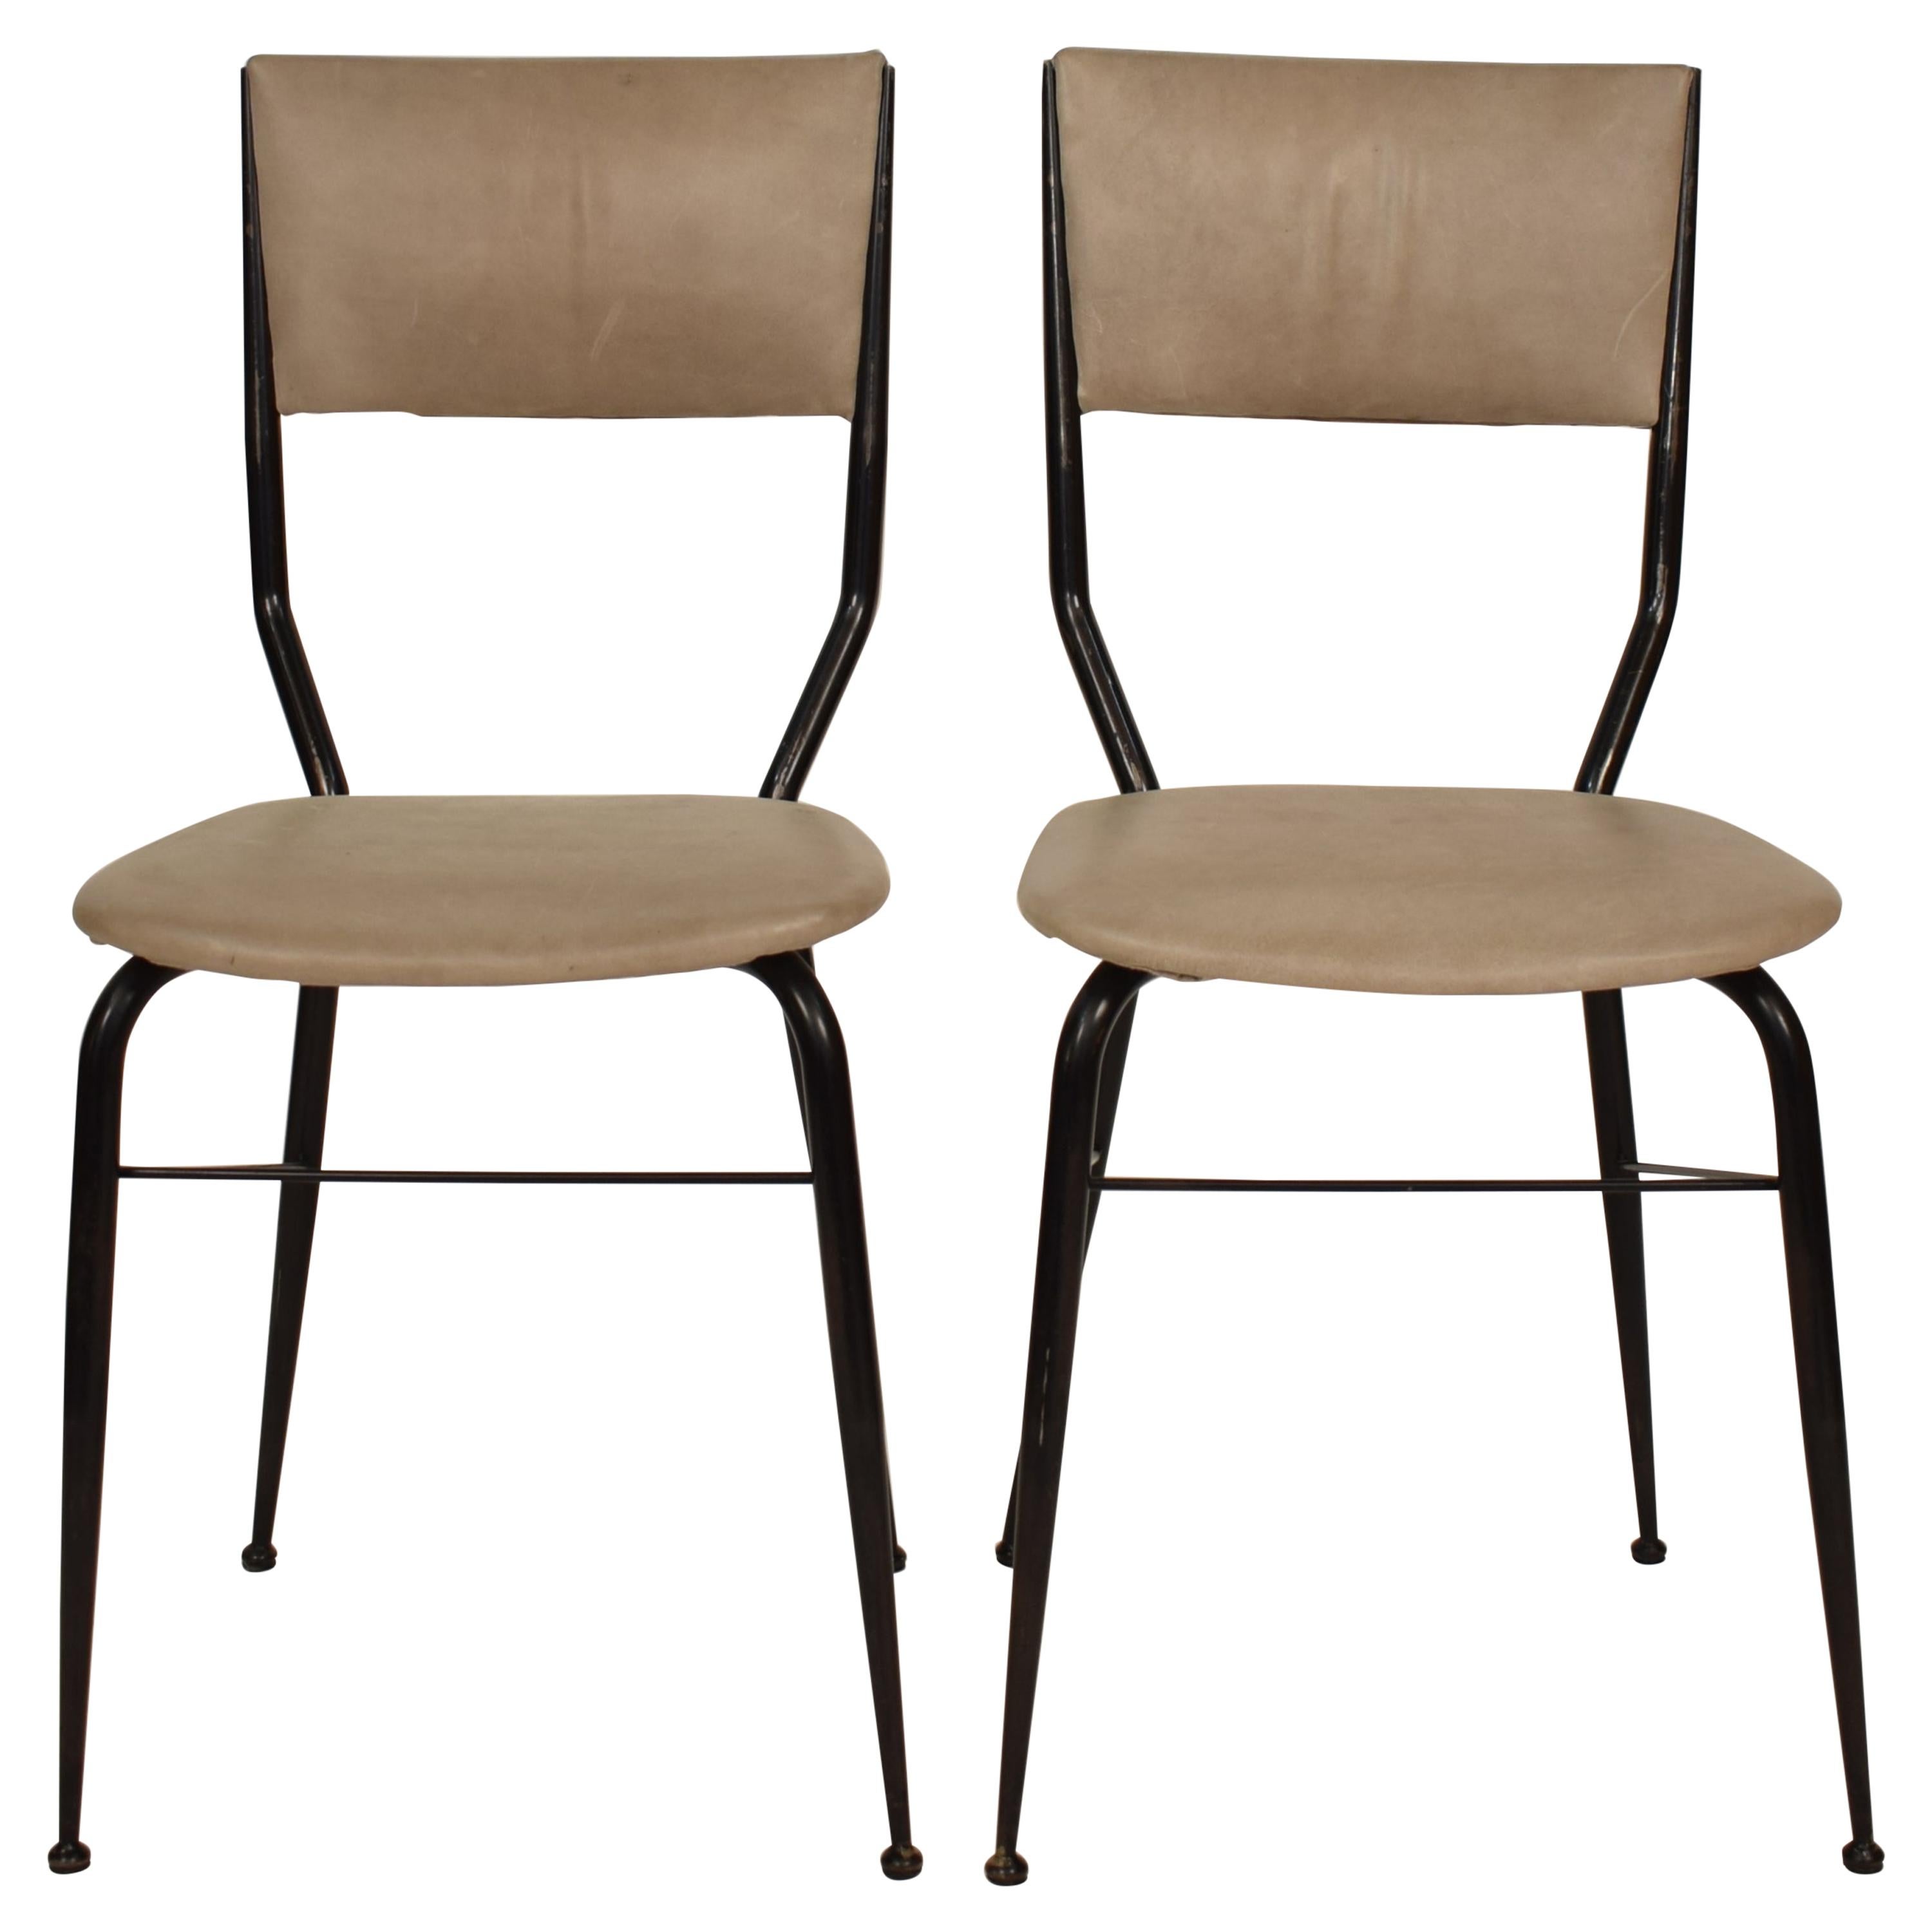 Pair of Midcentury Italian Black Metal and Grey Leather Dining Chairs, 1950